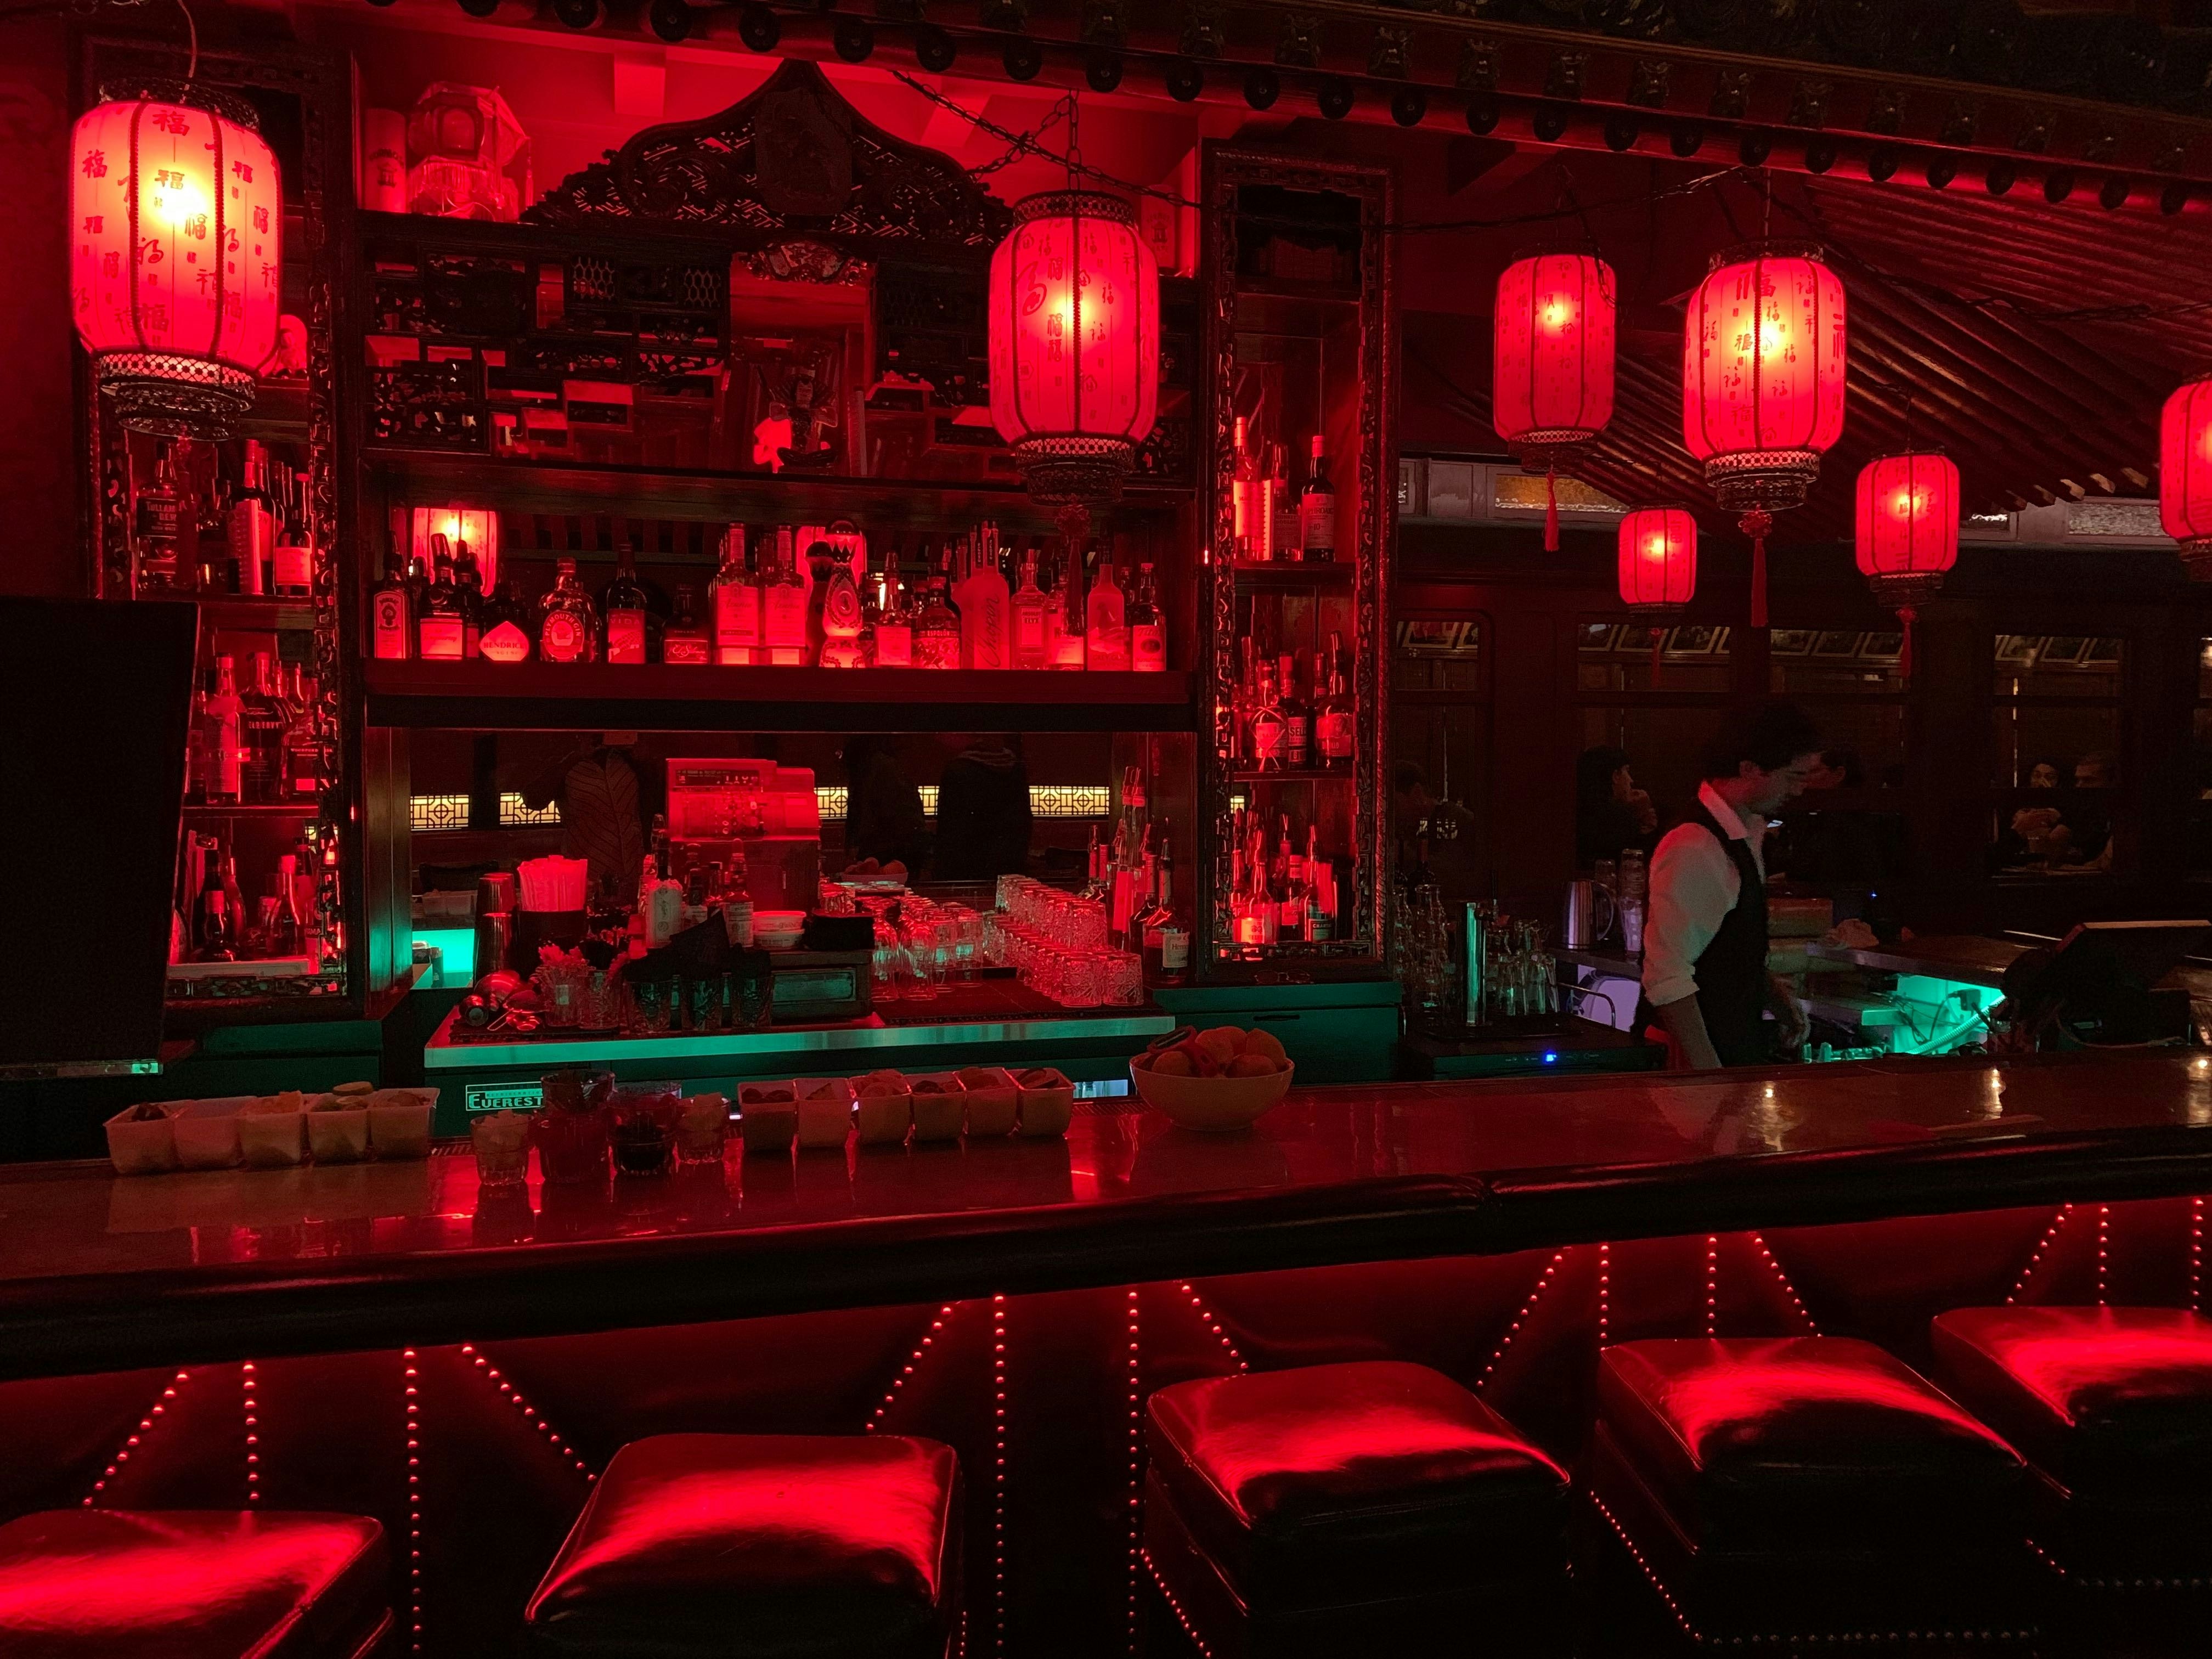 Red paper lanterns hang from the bar ceiling at The Cafe Formosa, casting a red light over the entire area. There is a bartender working on the side.